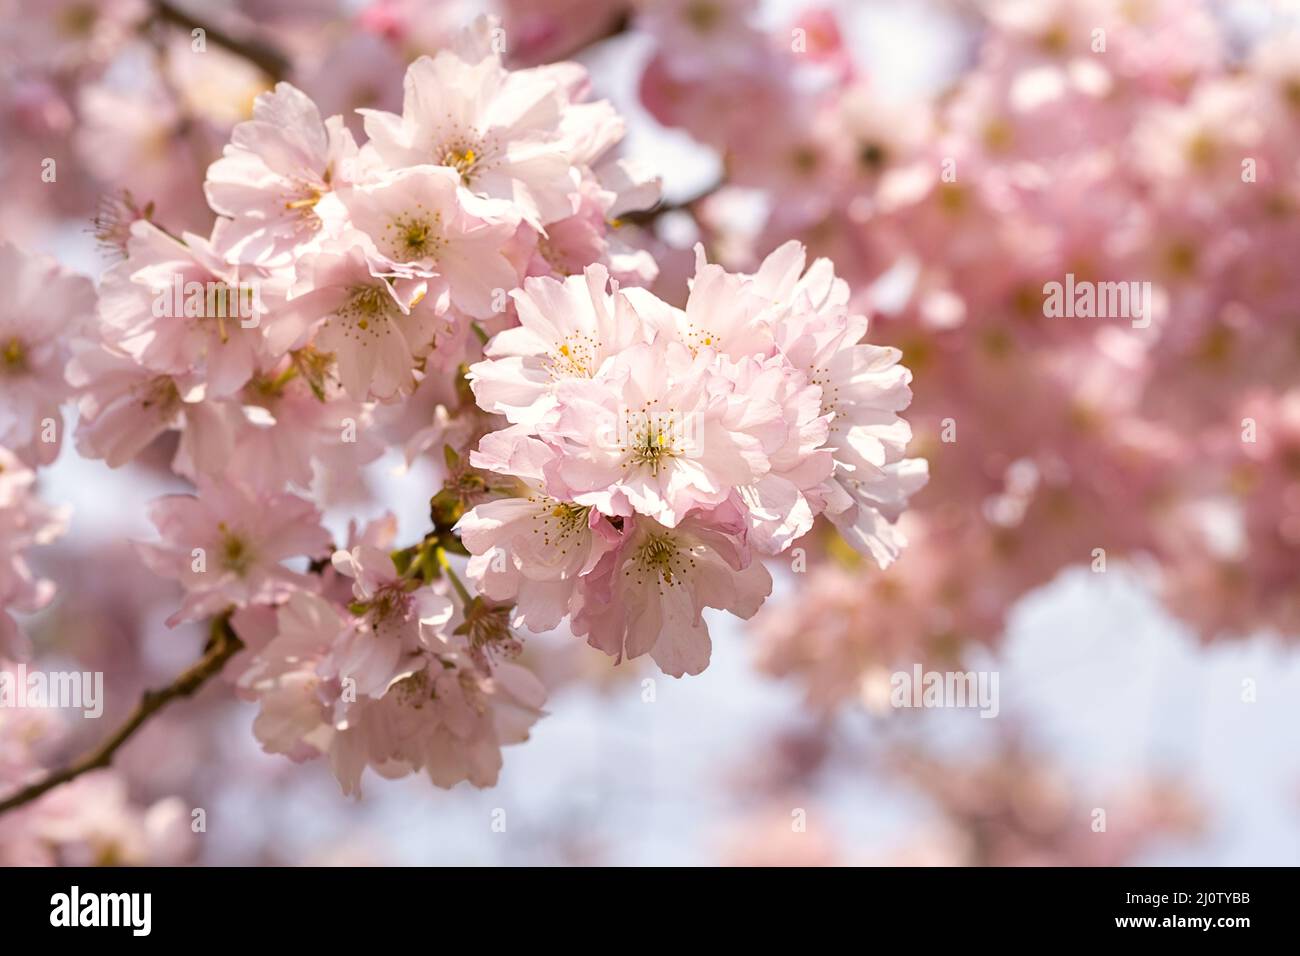 Sakura tree blossoms close up. Selective focus and copy space. Spring sakura blossoms. Pink cherry blossom twig close up over blue bokeh background. Spring trees blossom. Macro photography Stock Photo